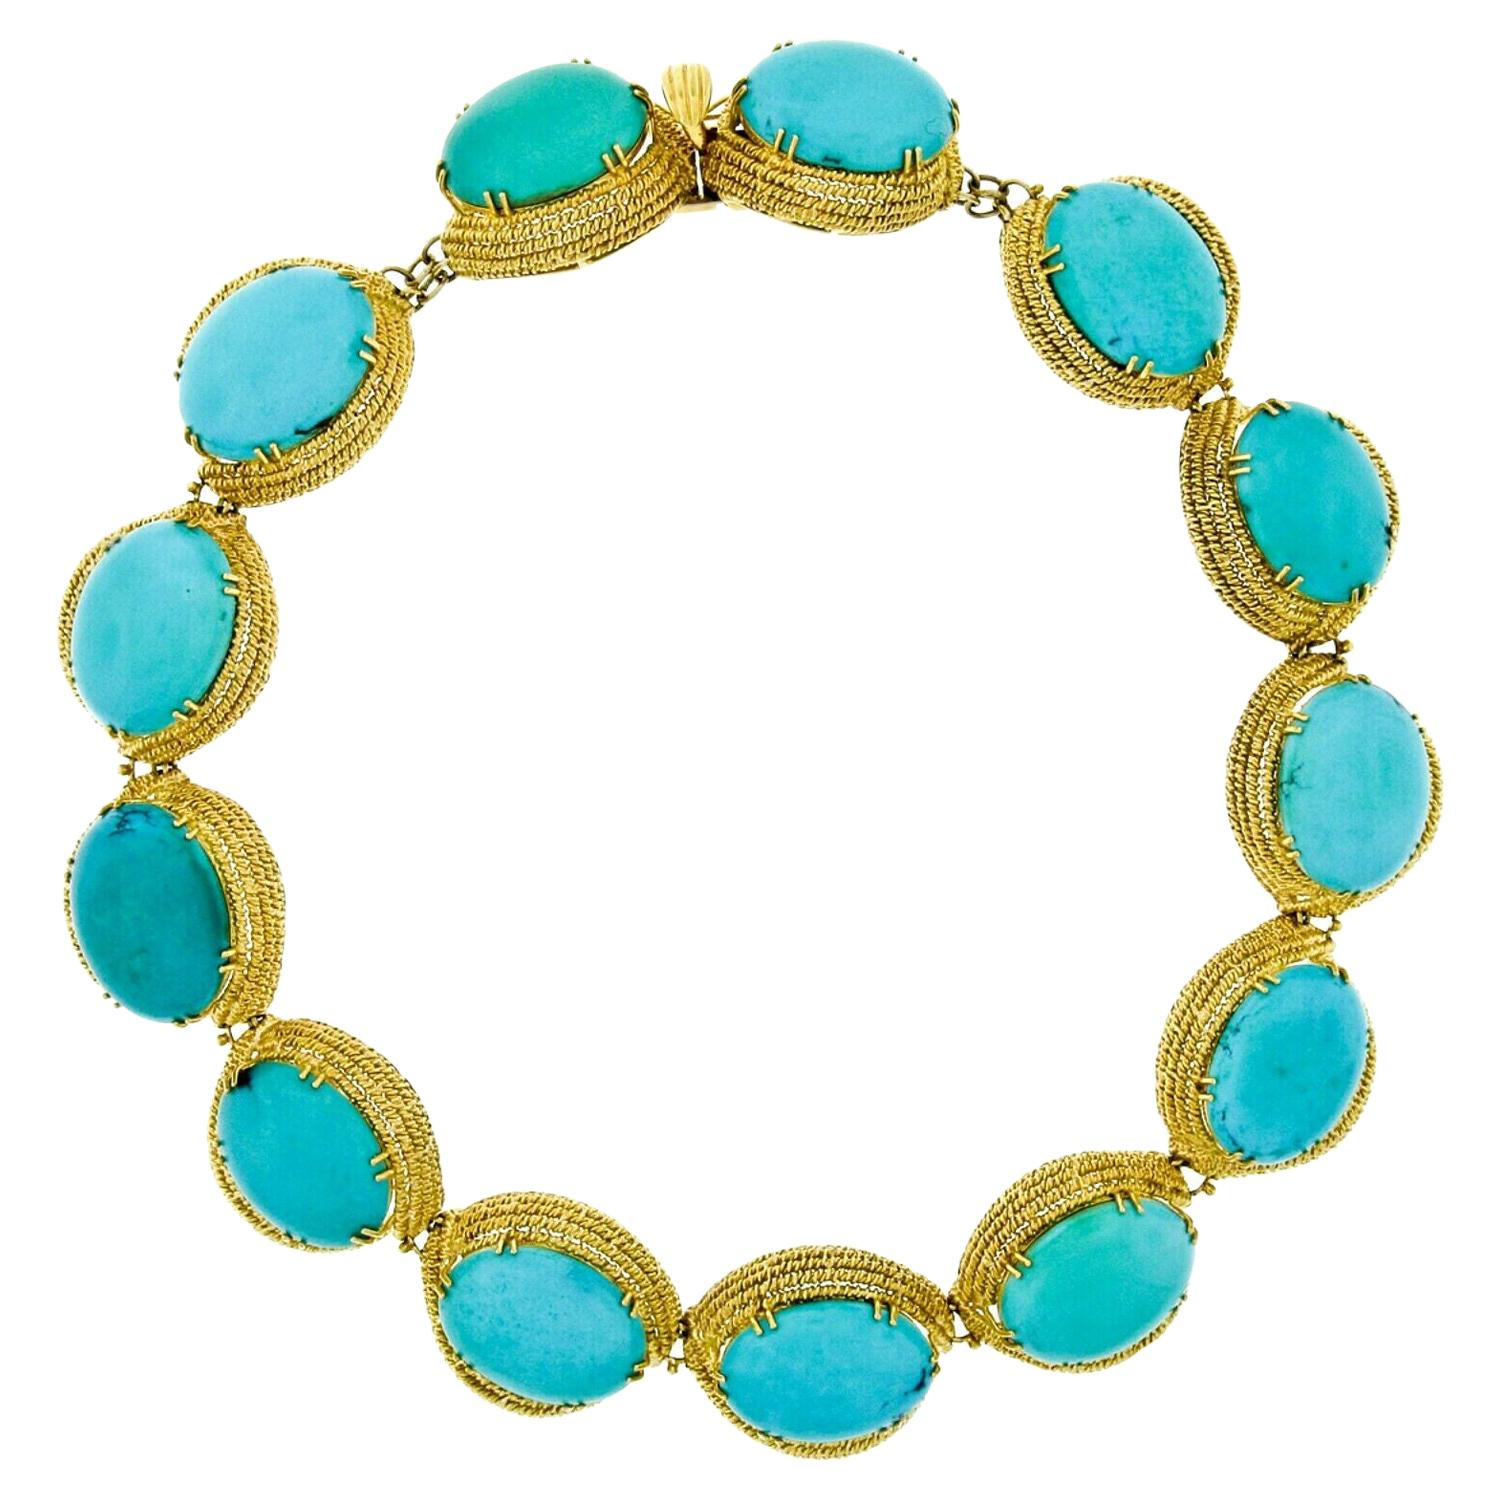 Vintage Handmade 18k Gold GIA Large 200ctw Cabochon Turquoise Statement Necklace